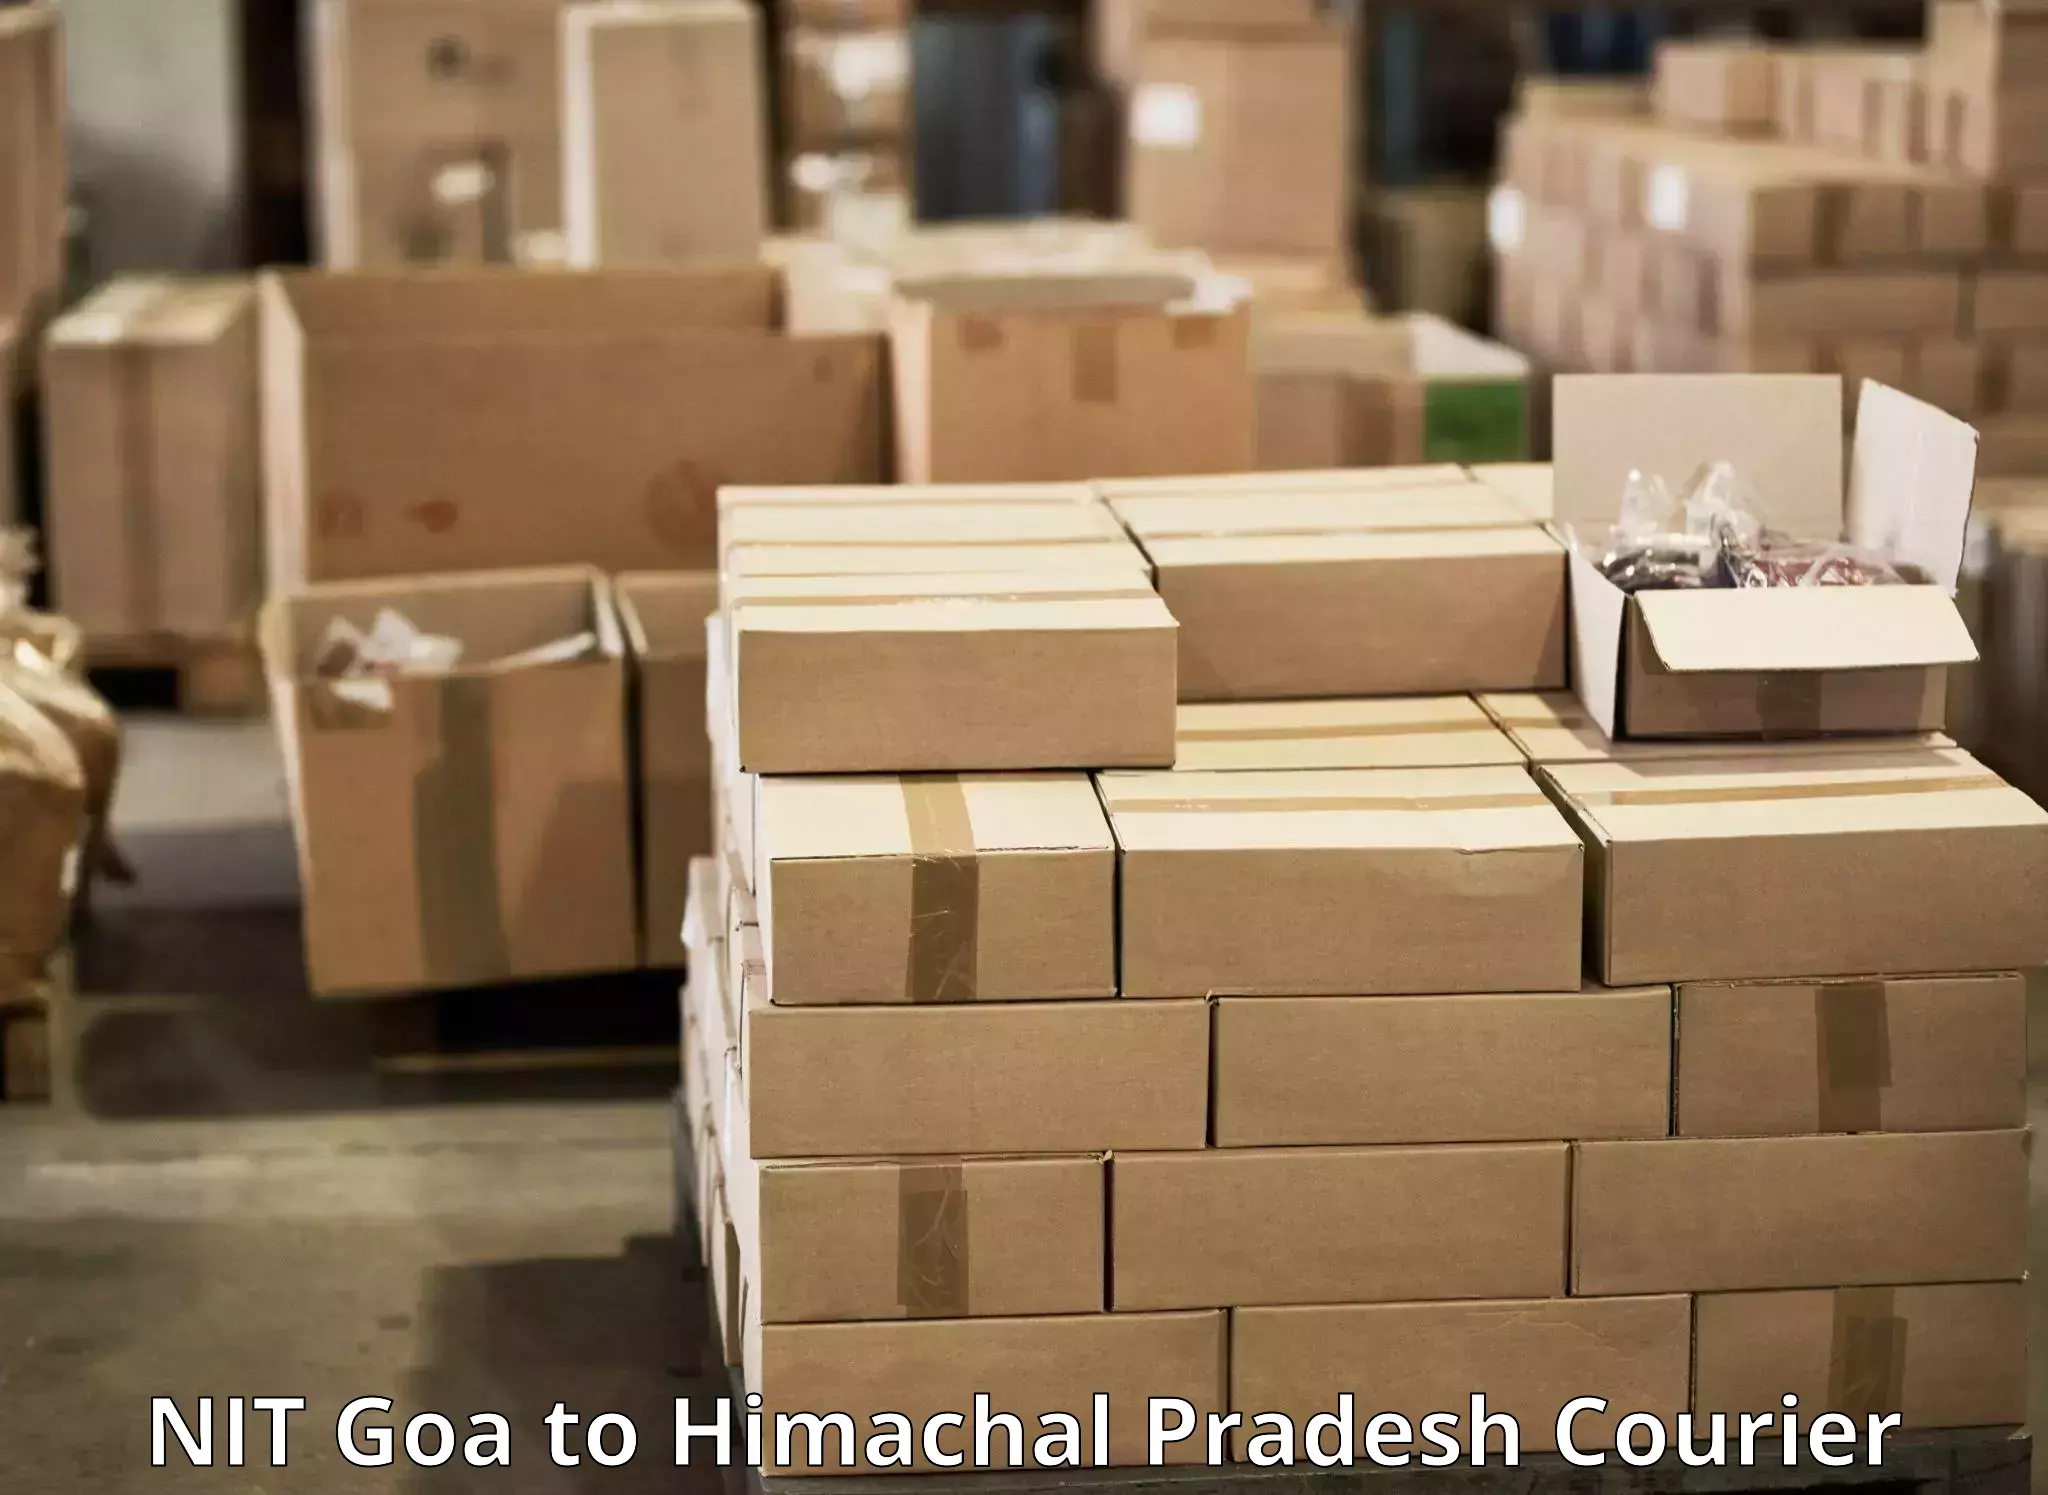 Small business couriers NIT Goa to Chintpurni